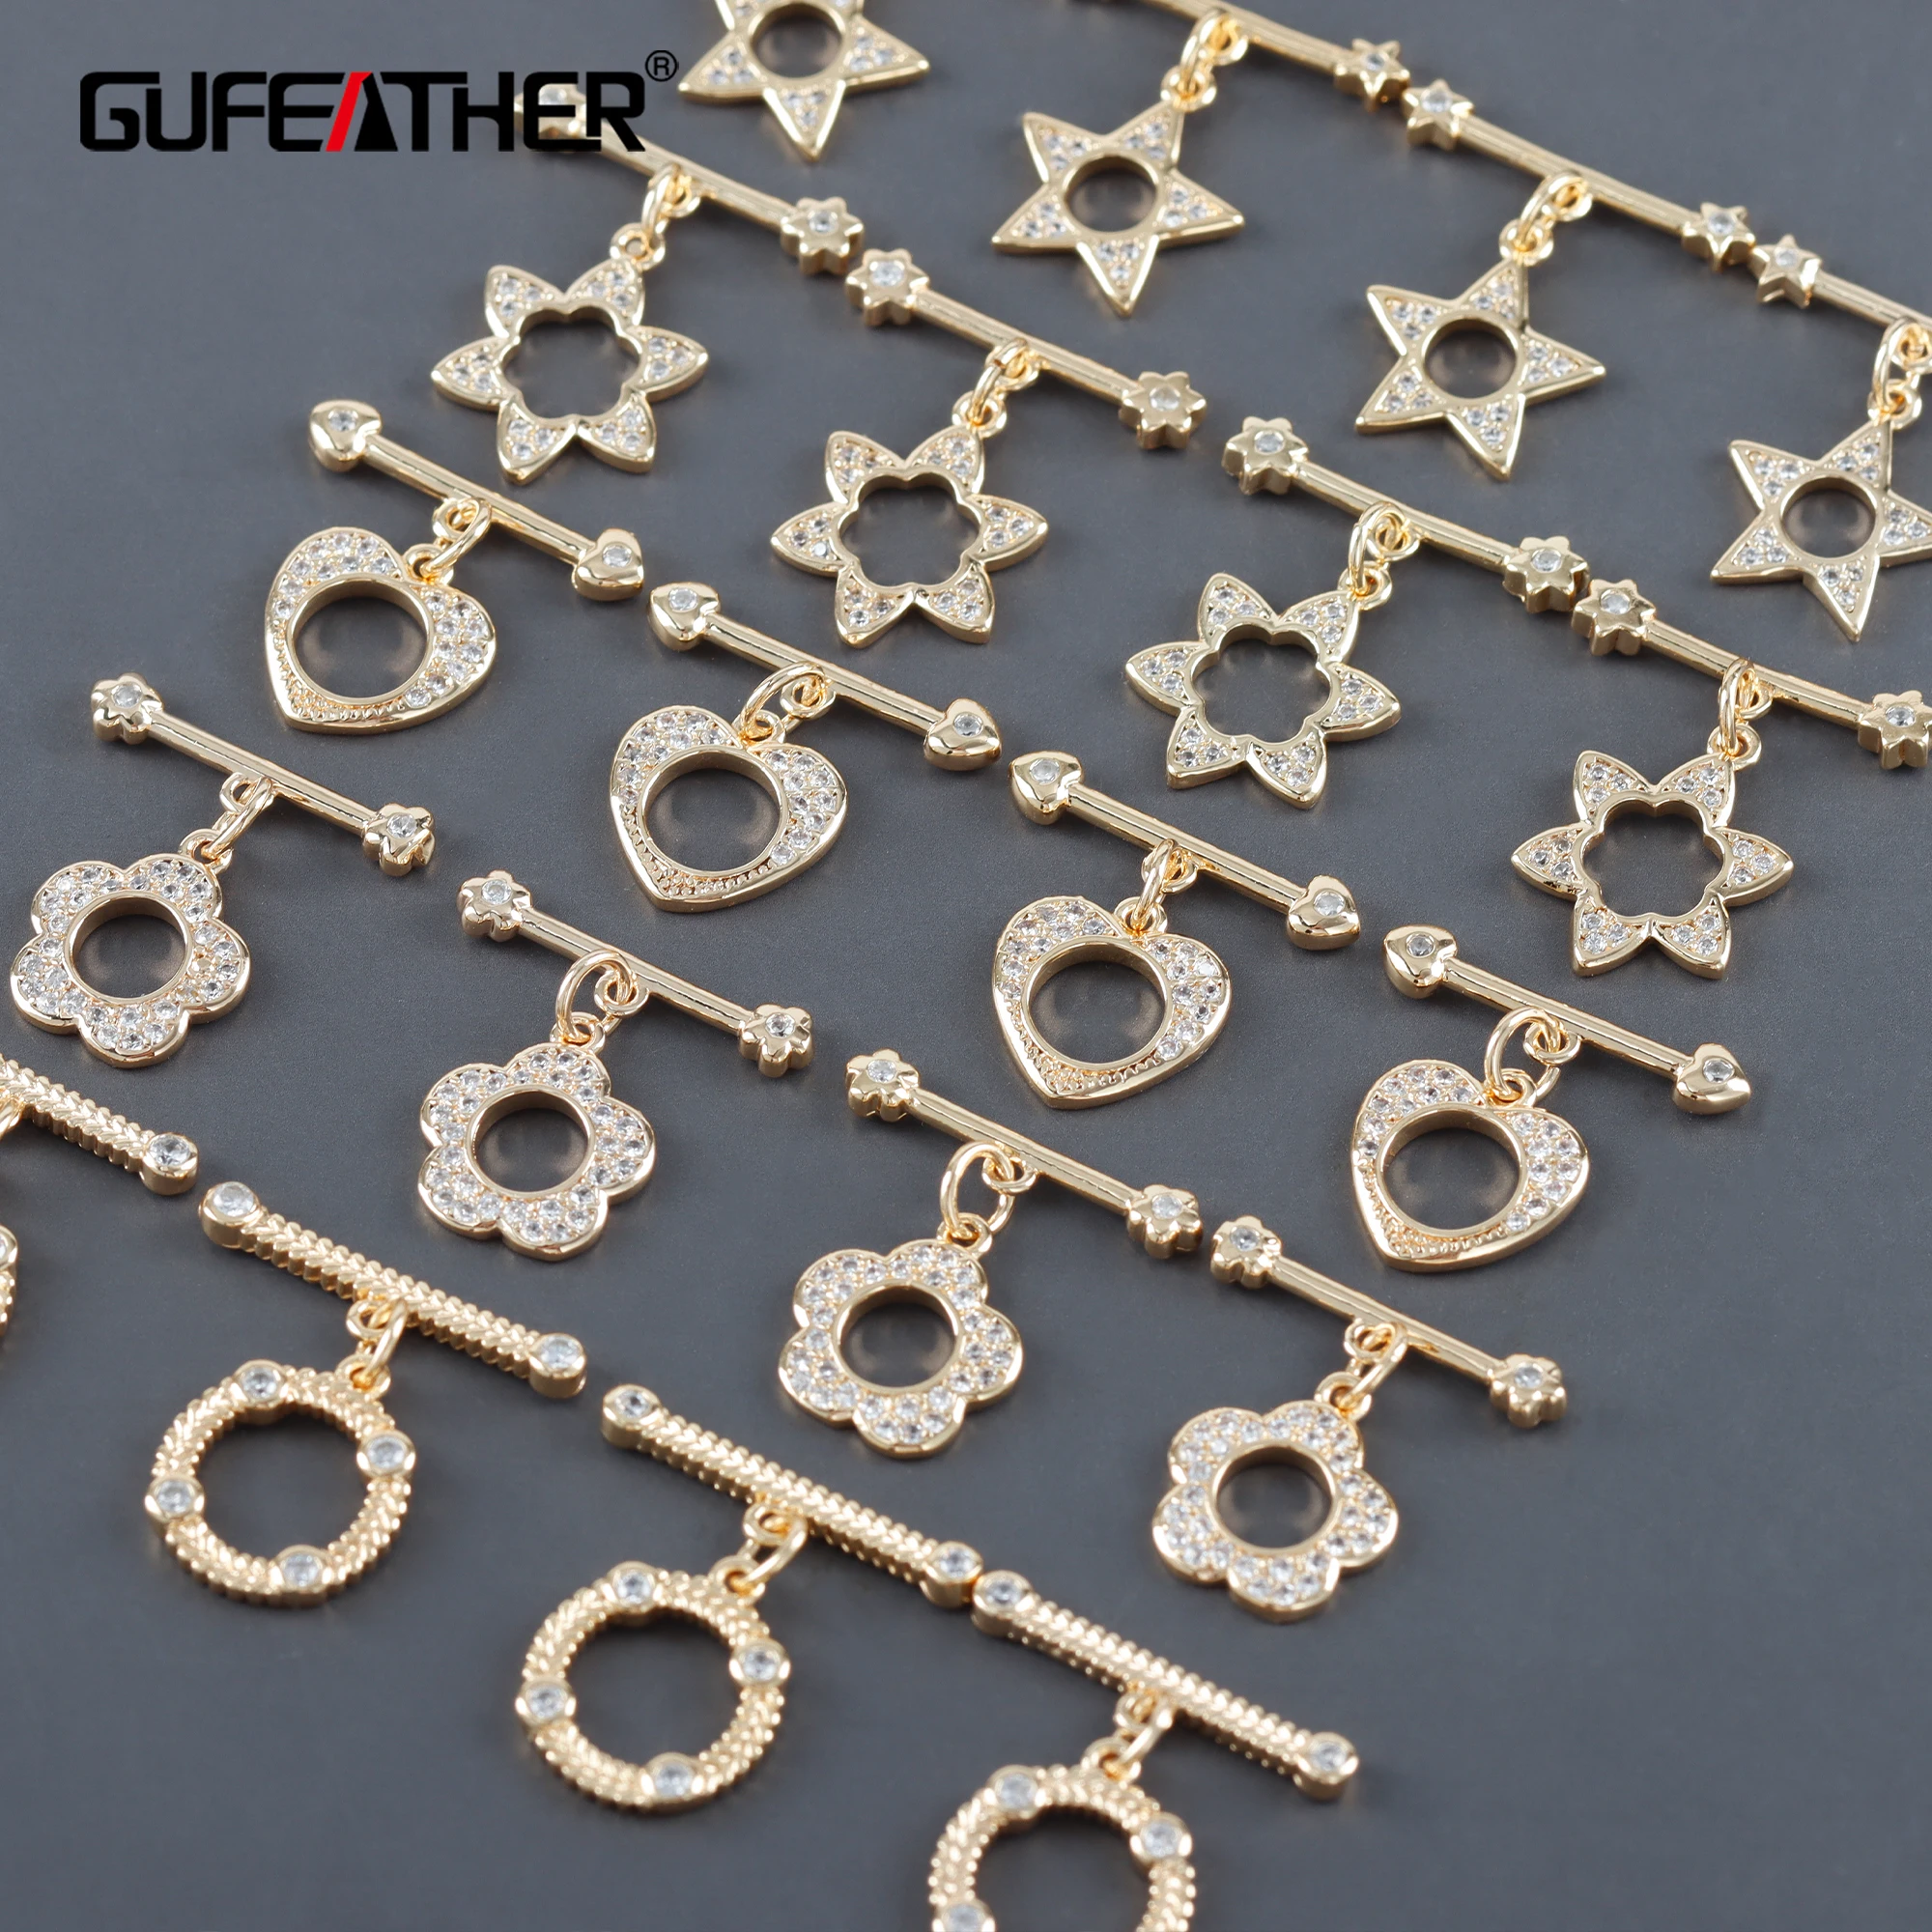 GUFEATHER M1112,jewelry accessories,ot clasp,18k gold plated,copper,zircons,nickel free,chain connector,jewelry making,6pcs/lot